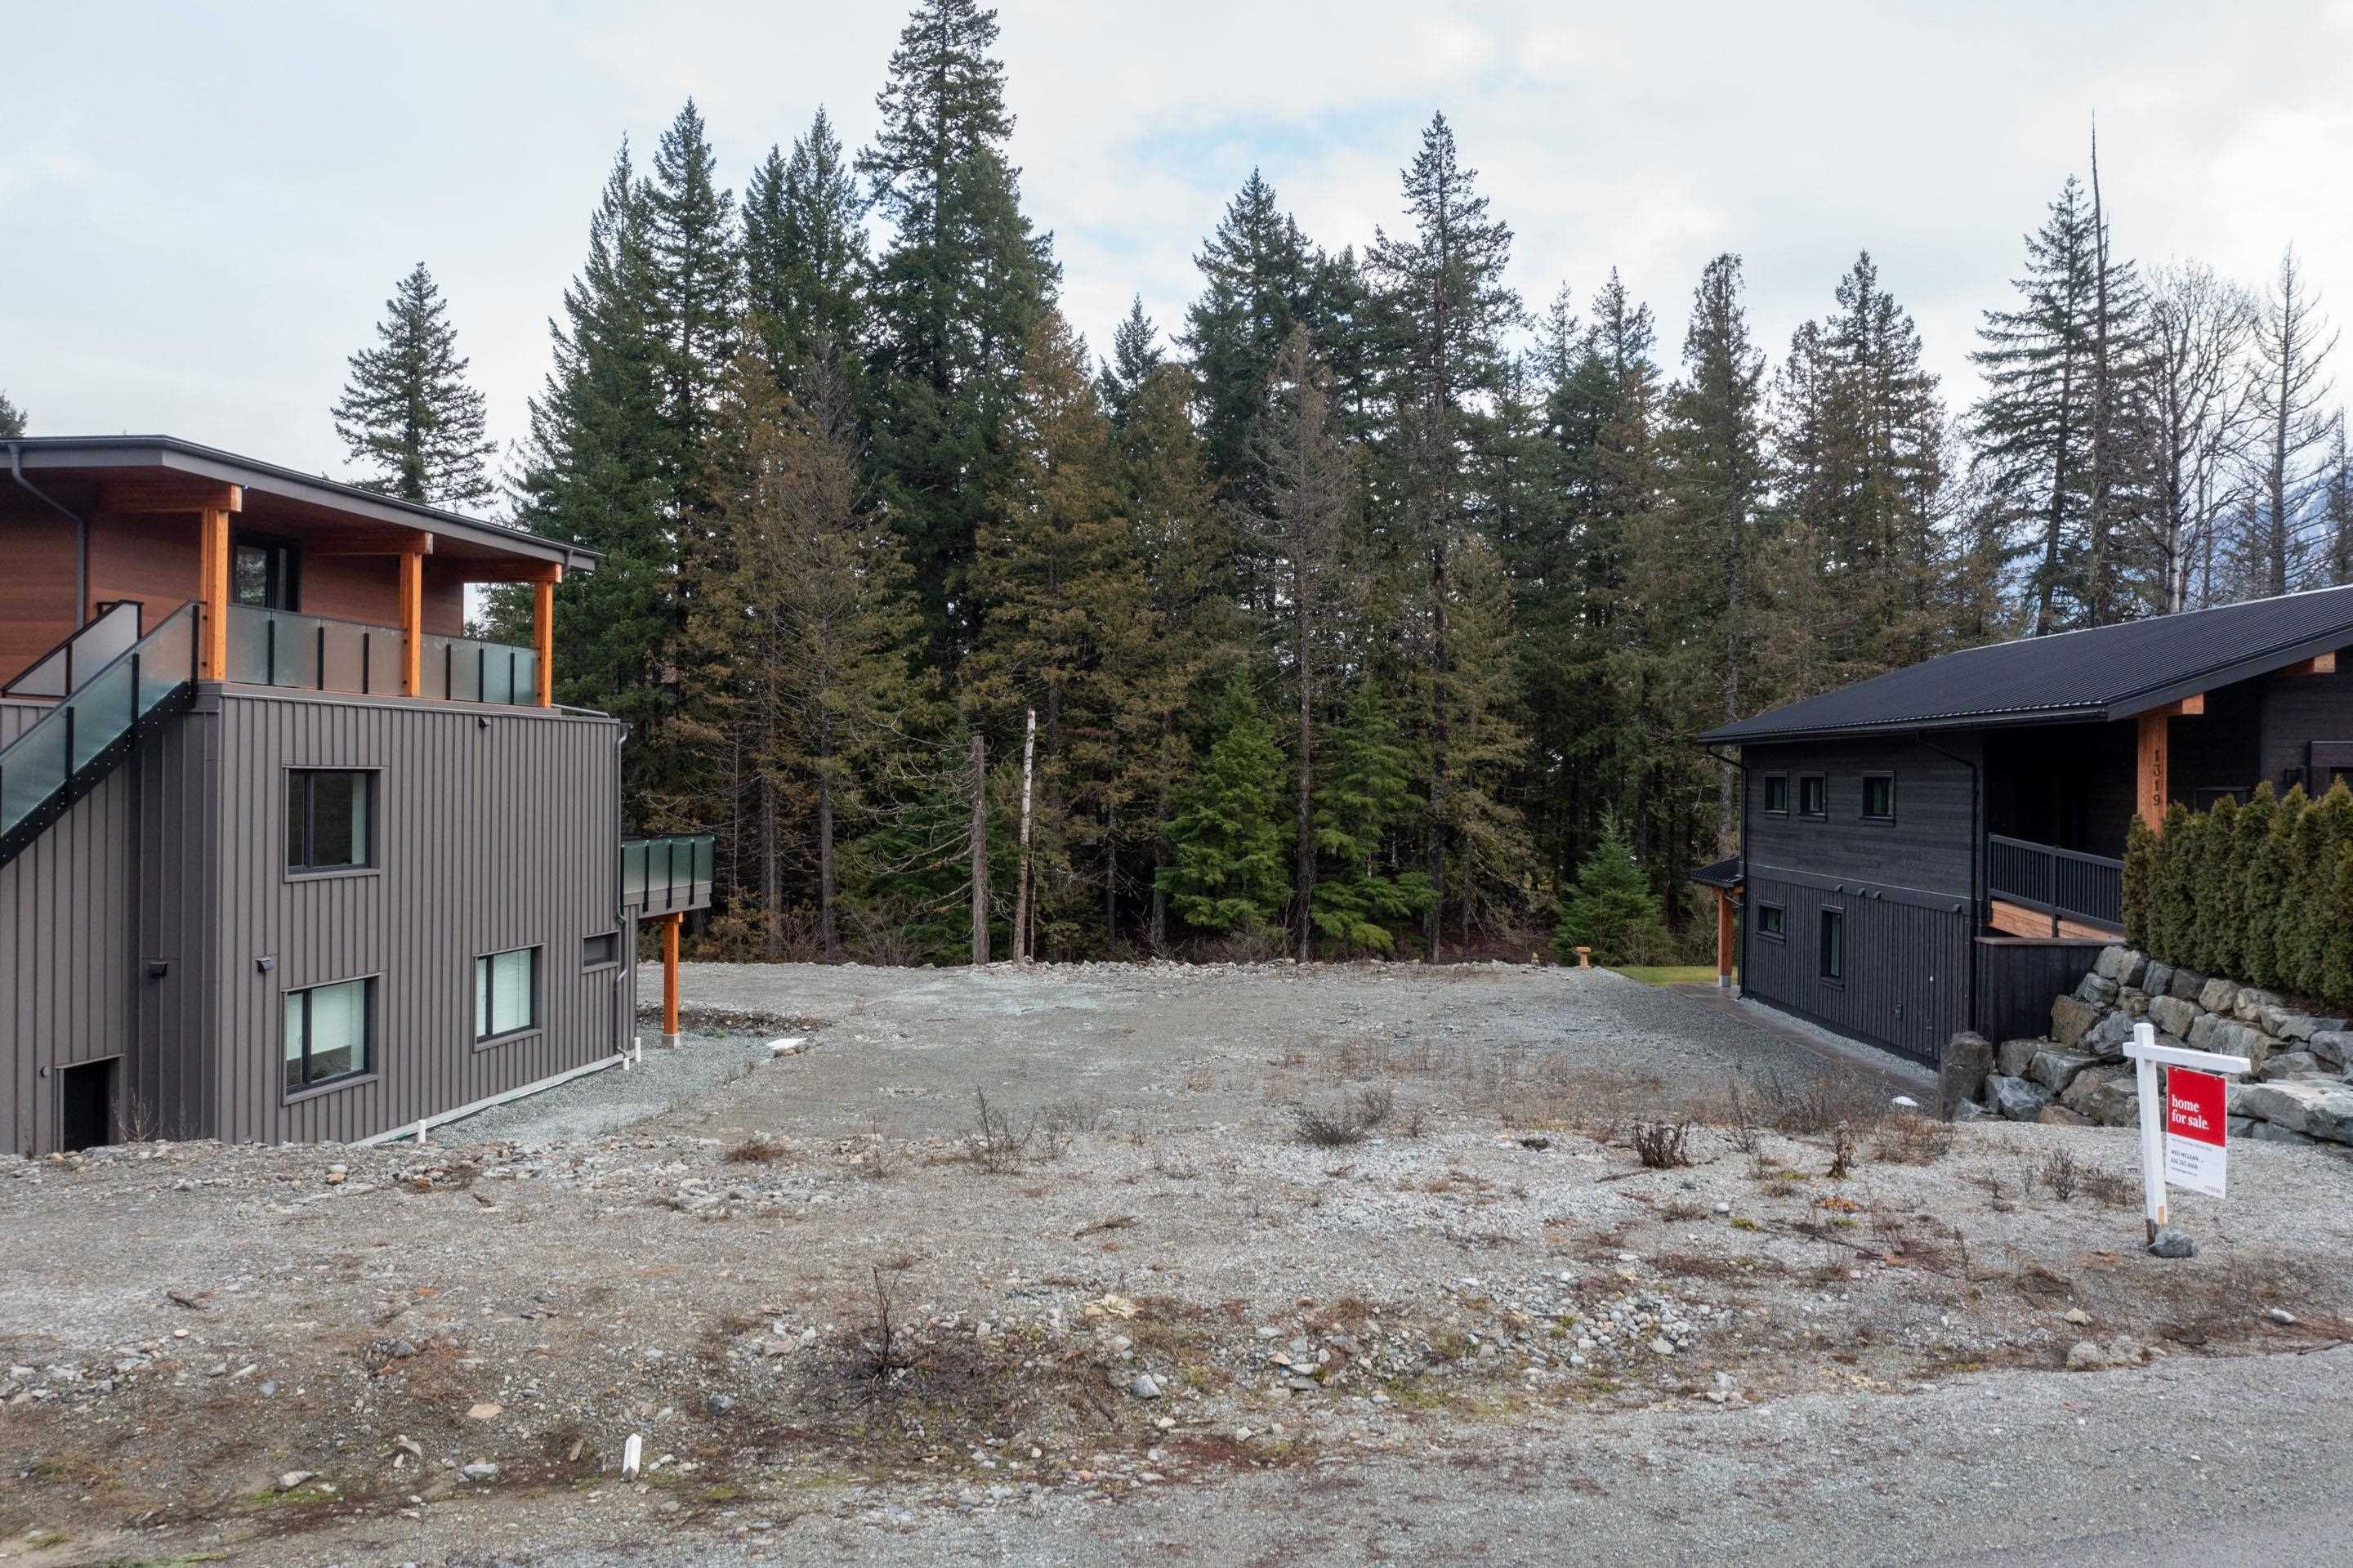 Michael Sung, 1317 EAGLE, Pemberton, British Columbia, Land Only,For Sale ,R2840721